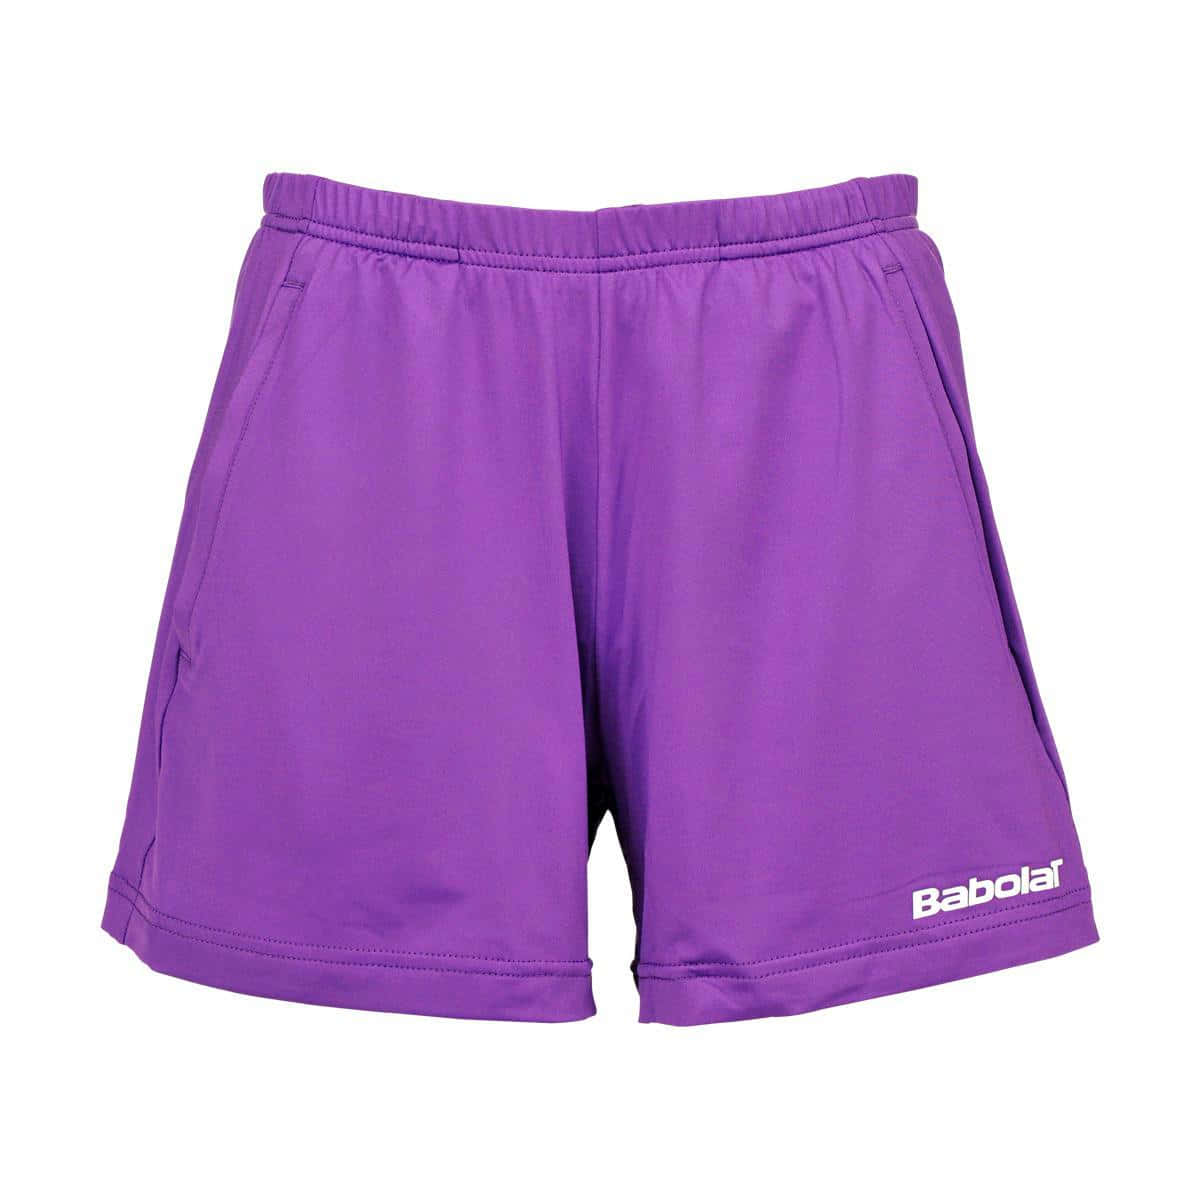 Love your look! Casual, cool and relaxed in a pair of purple shorts Wallpaper